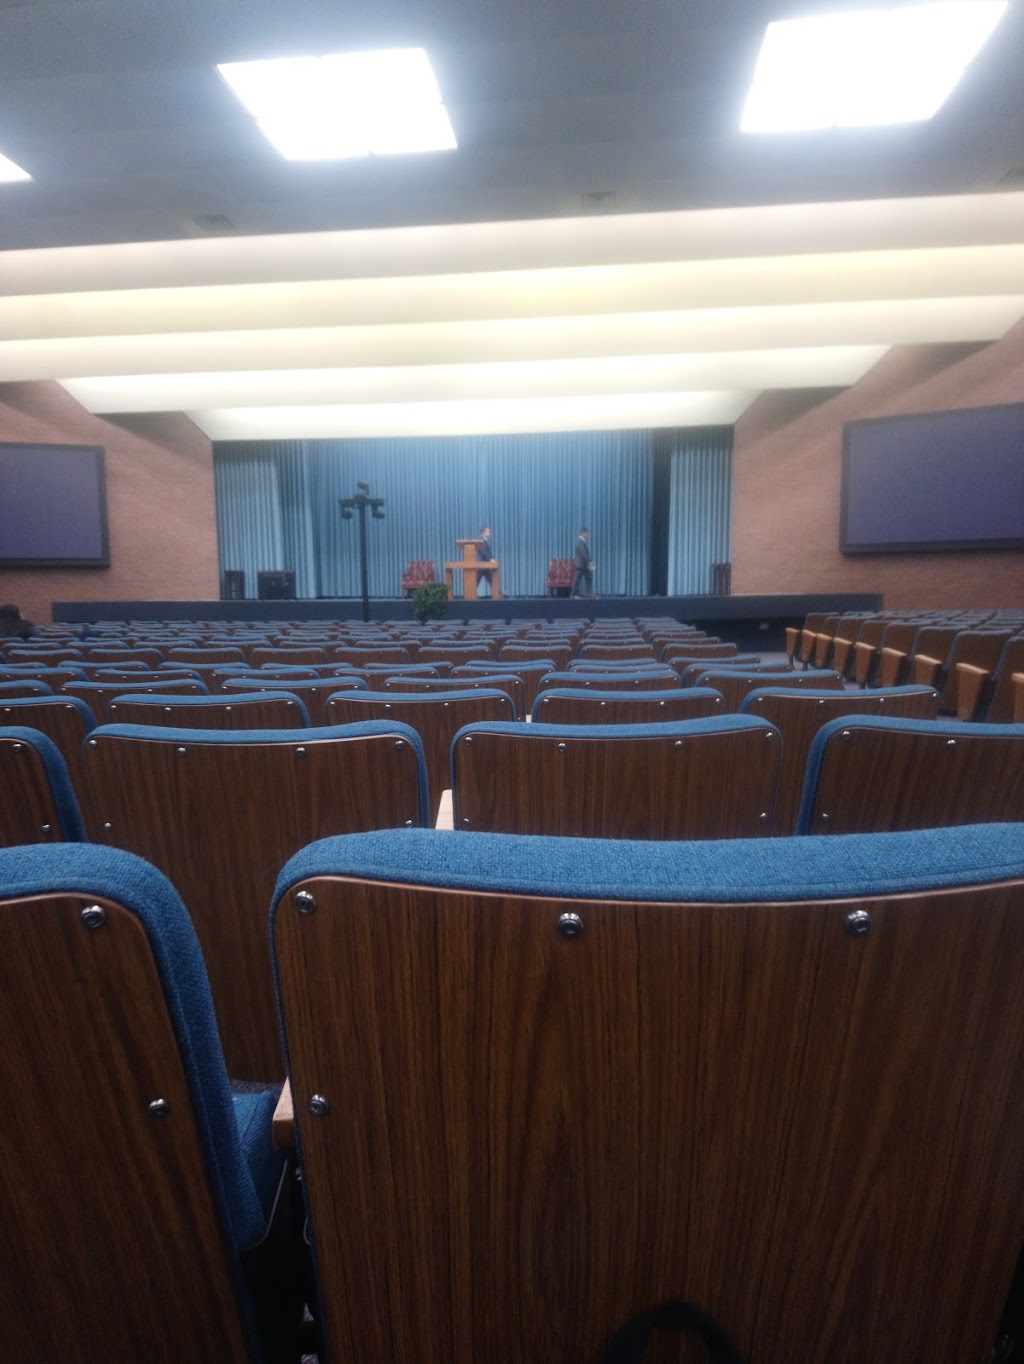 Assembly Hall of Jehovahs Witnesses | church | 2594 Bovaird Dr W, Brampton, ON L7G 4S4, Canada | 9058734100 OR +1 905-873-4100